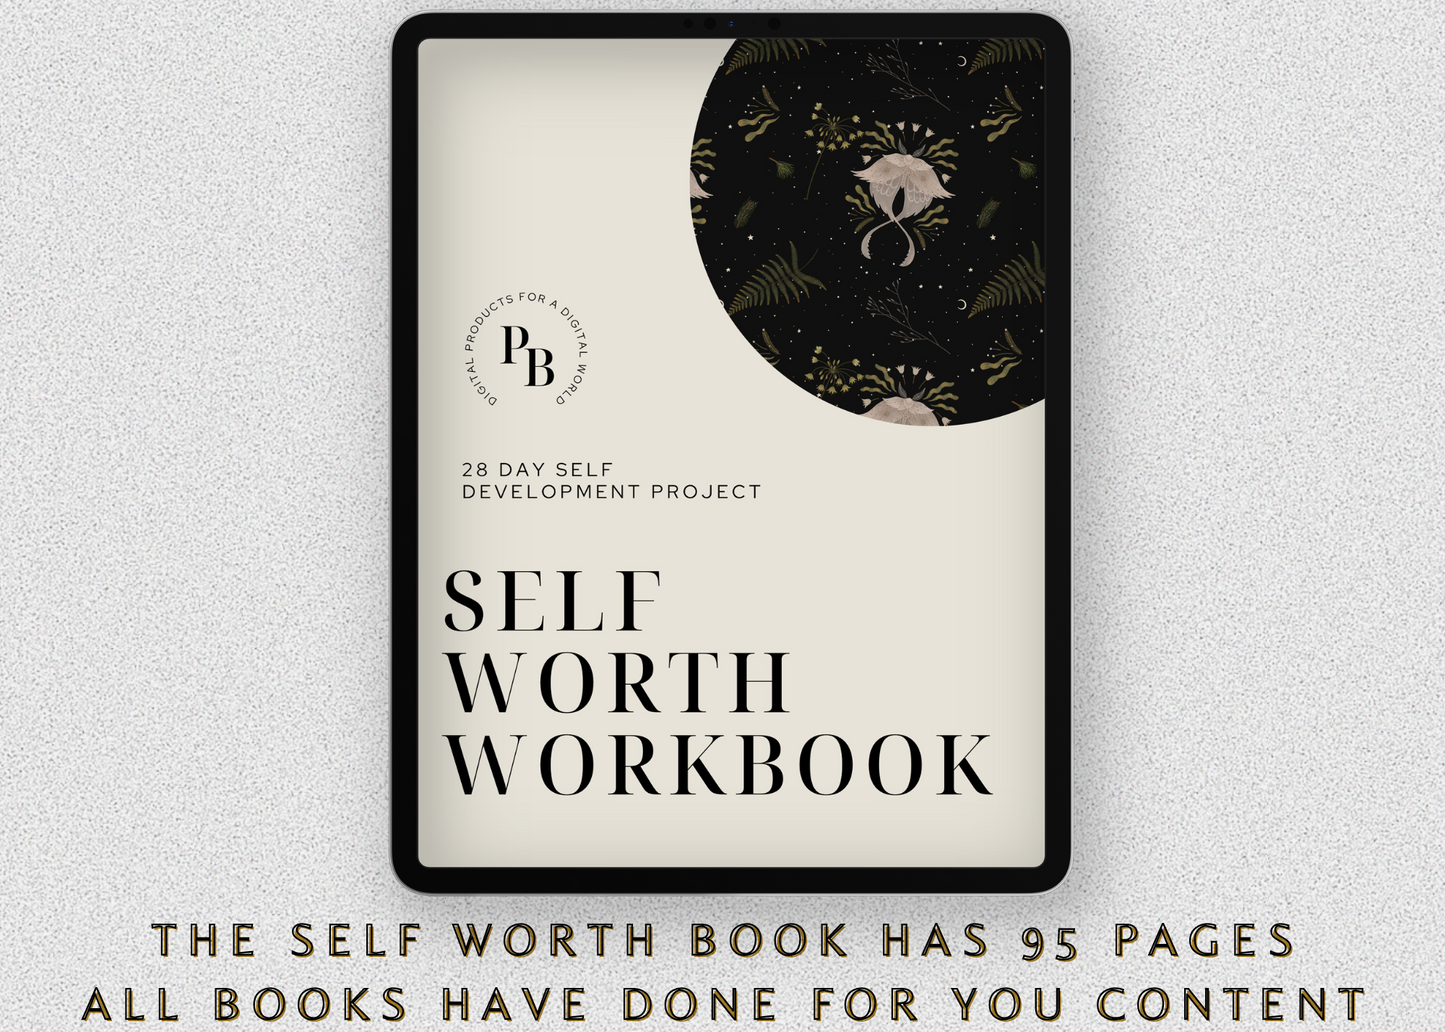 customizable digital planners-PLR White Labeled Digital Workbook Package- Customized Done For You Content Workbooks- Customized Digital Planners